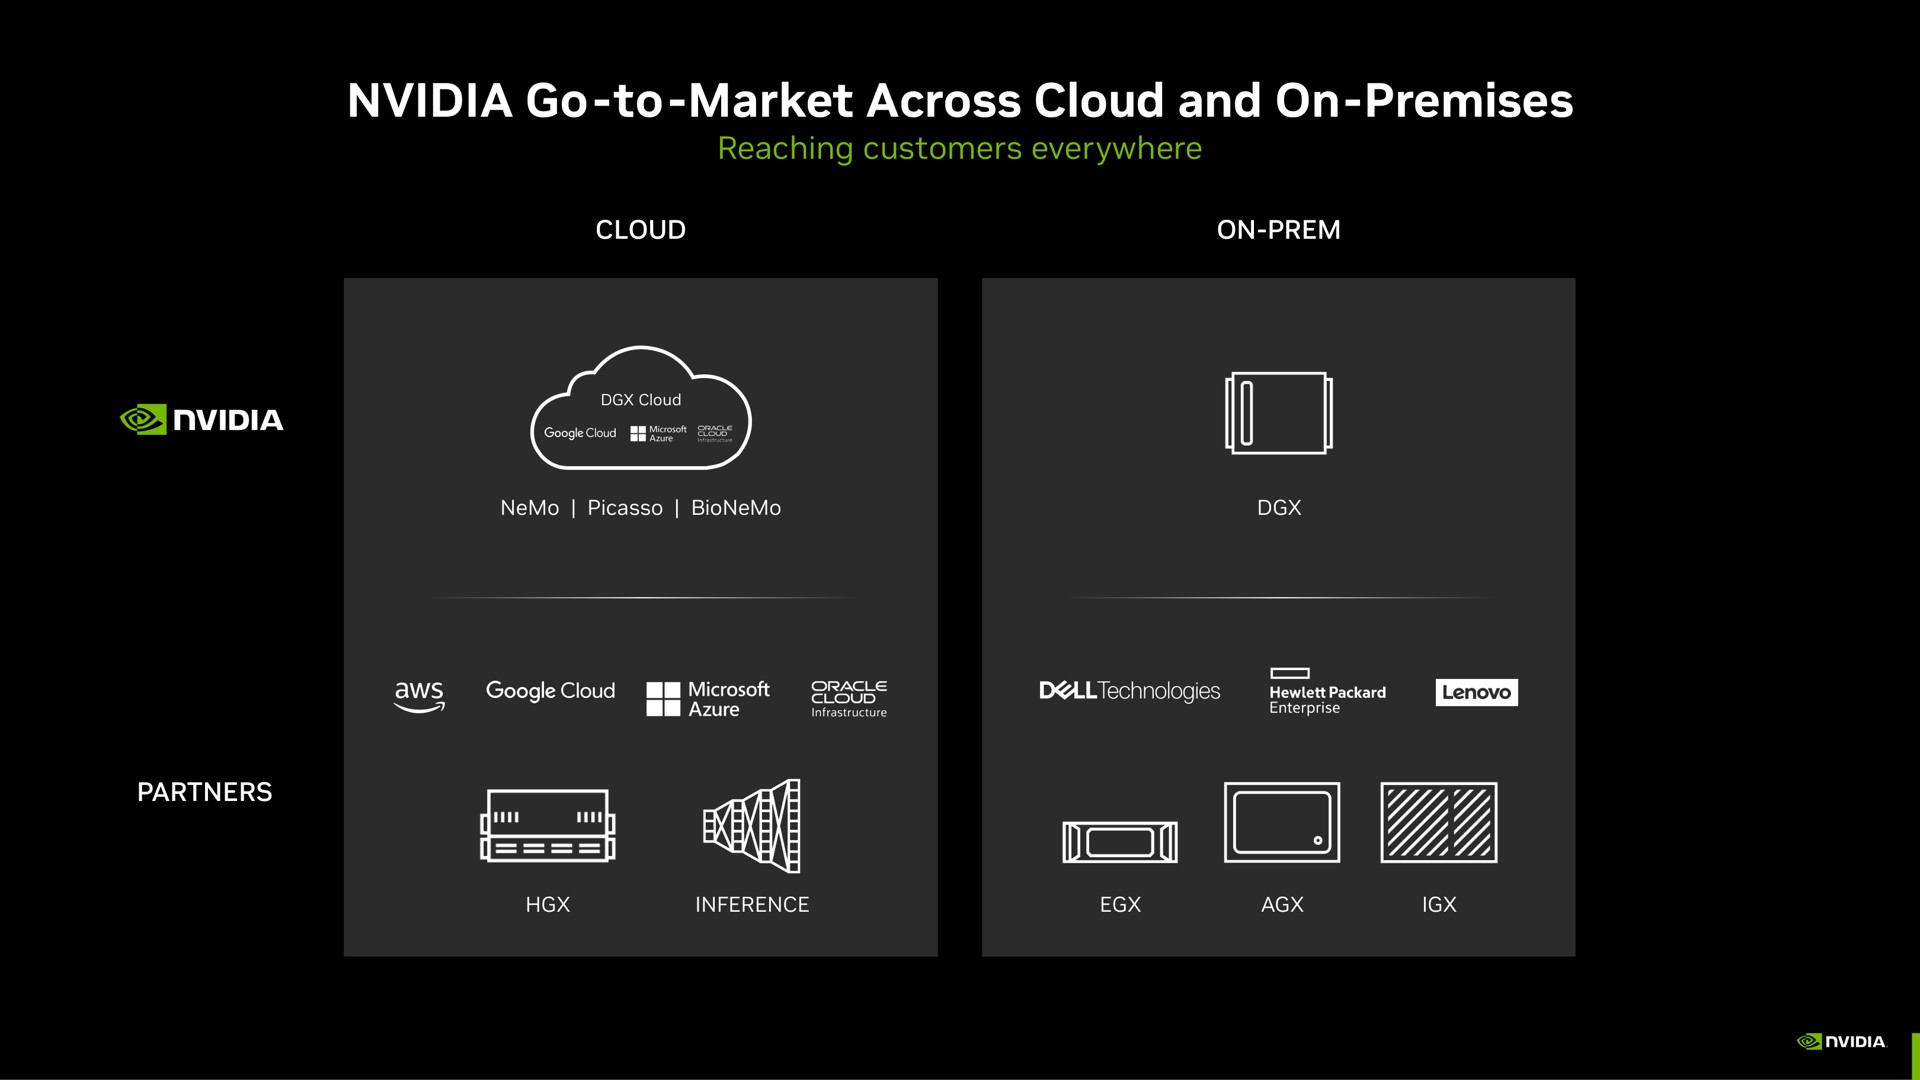 go to market across cloud and on premises | NVIDIA